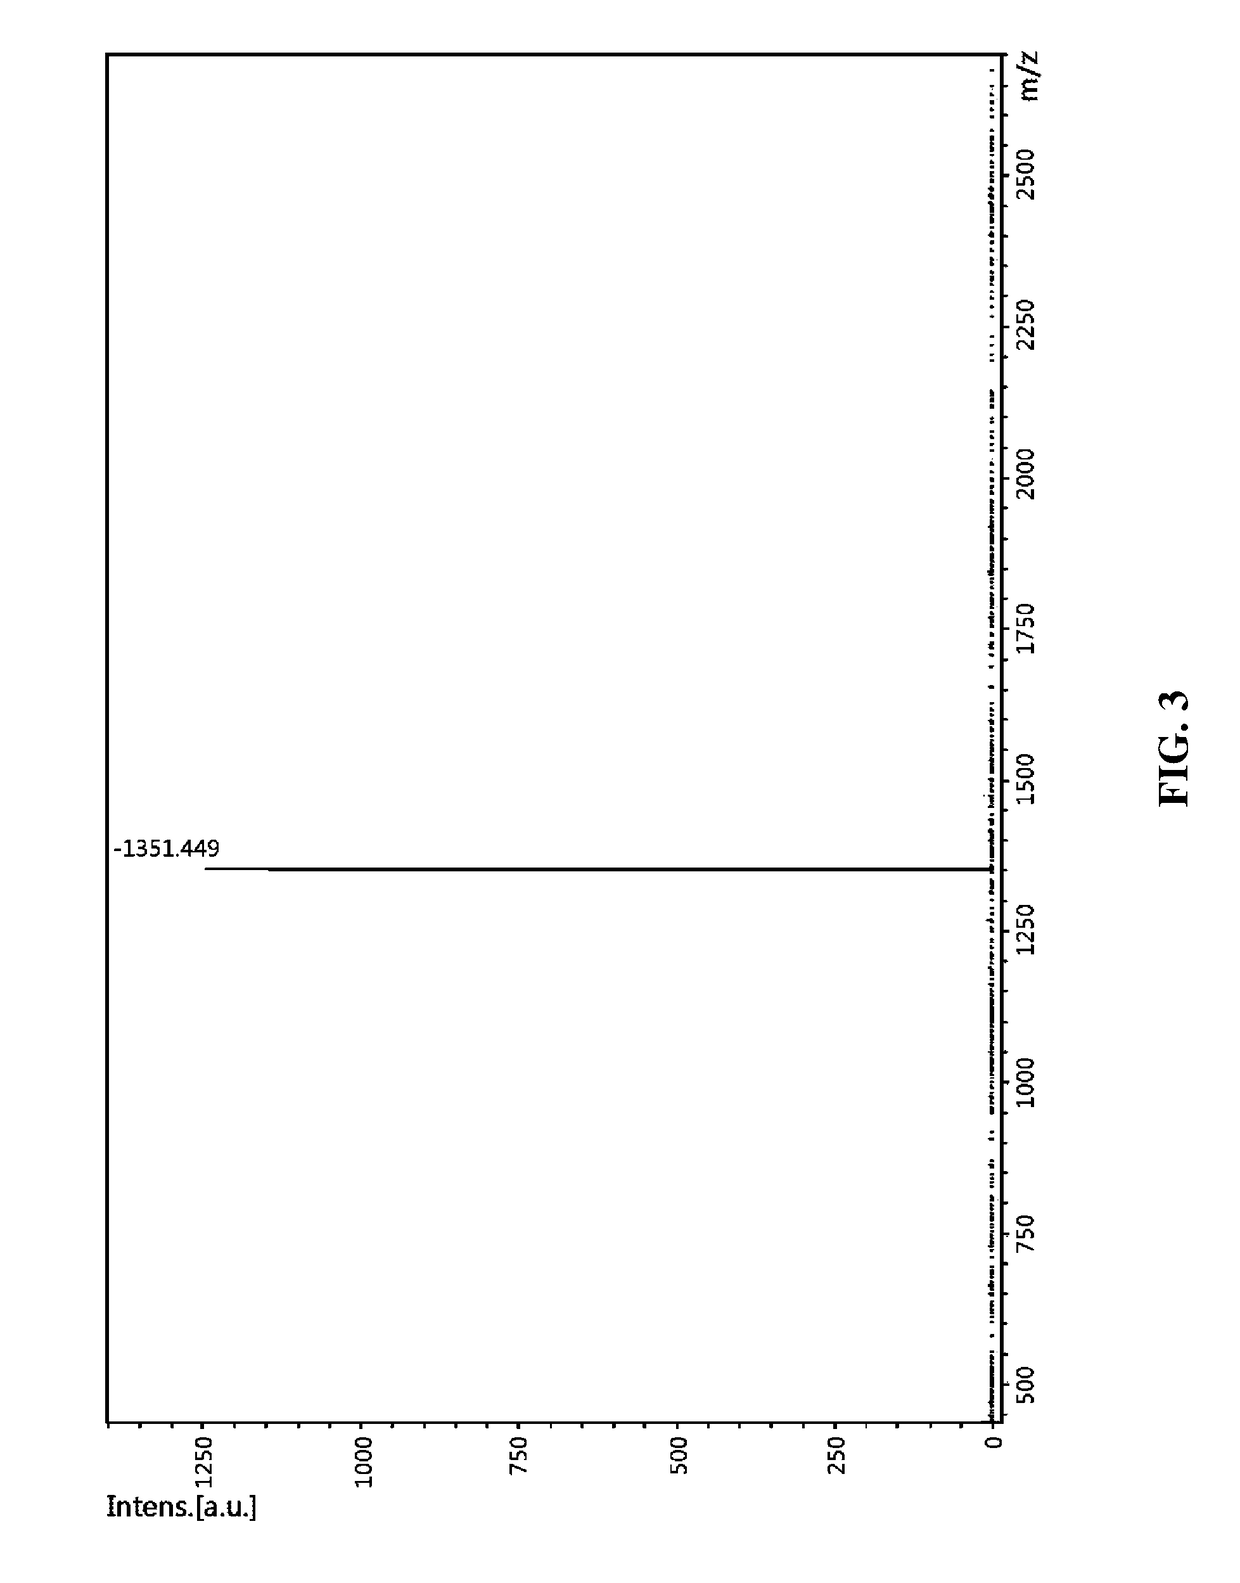 Composition, containing rgd motif-containing peptide or fragment thereof, for treating burns and glaucoma, alleviating skin wrinkles, and promoting hair growth